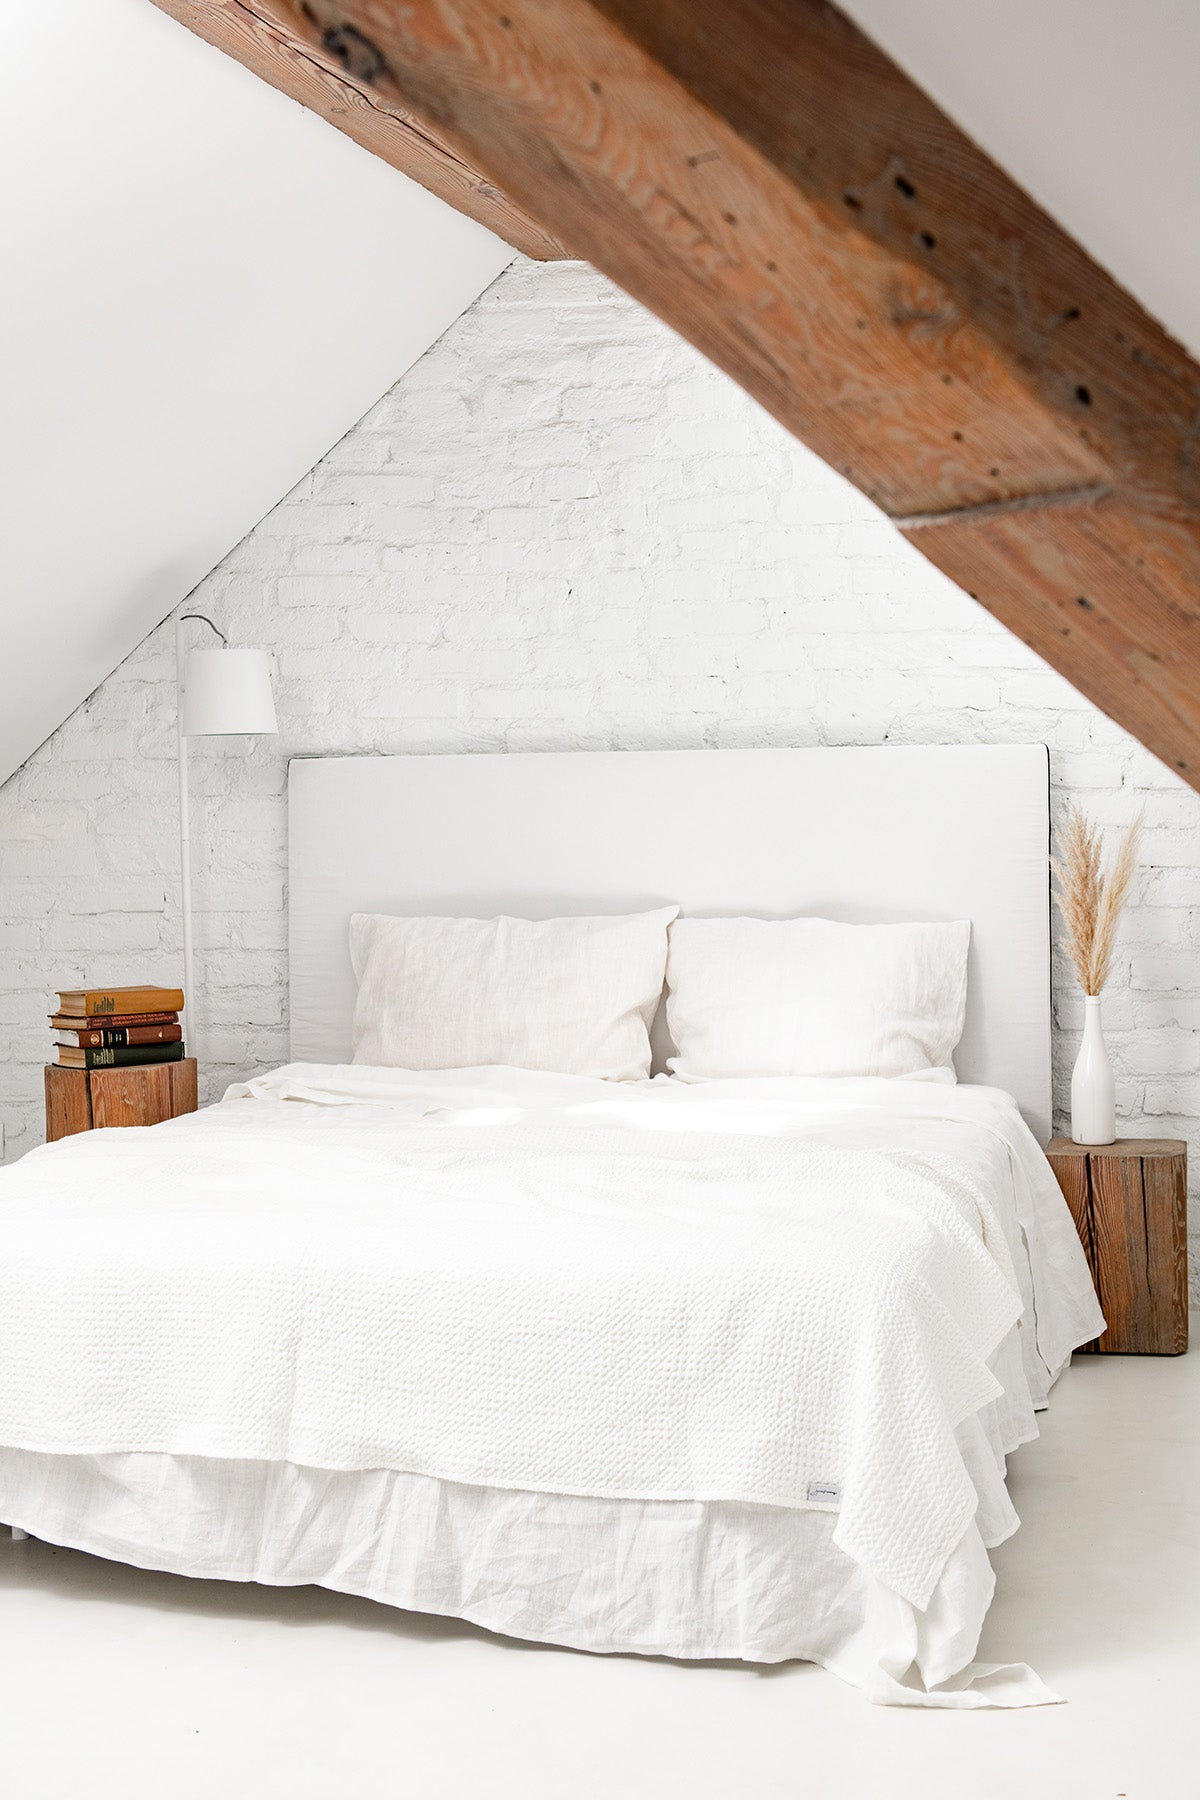 White Linen Waffle Blanket on Bed of A Rustic Room by Amourlinen